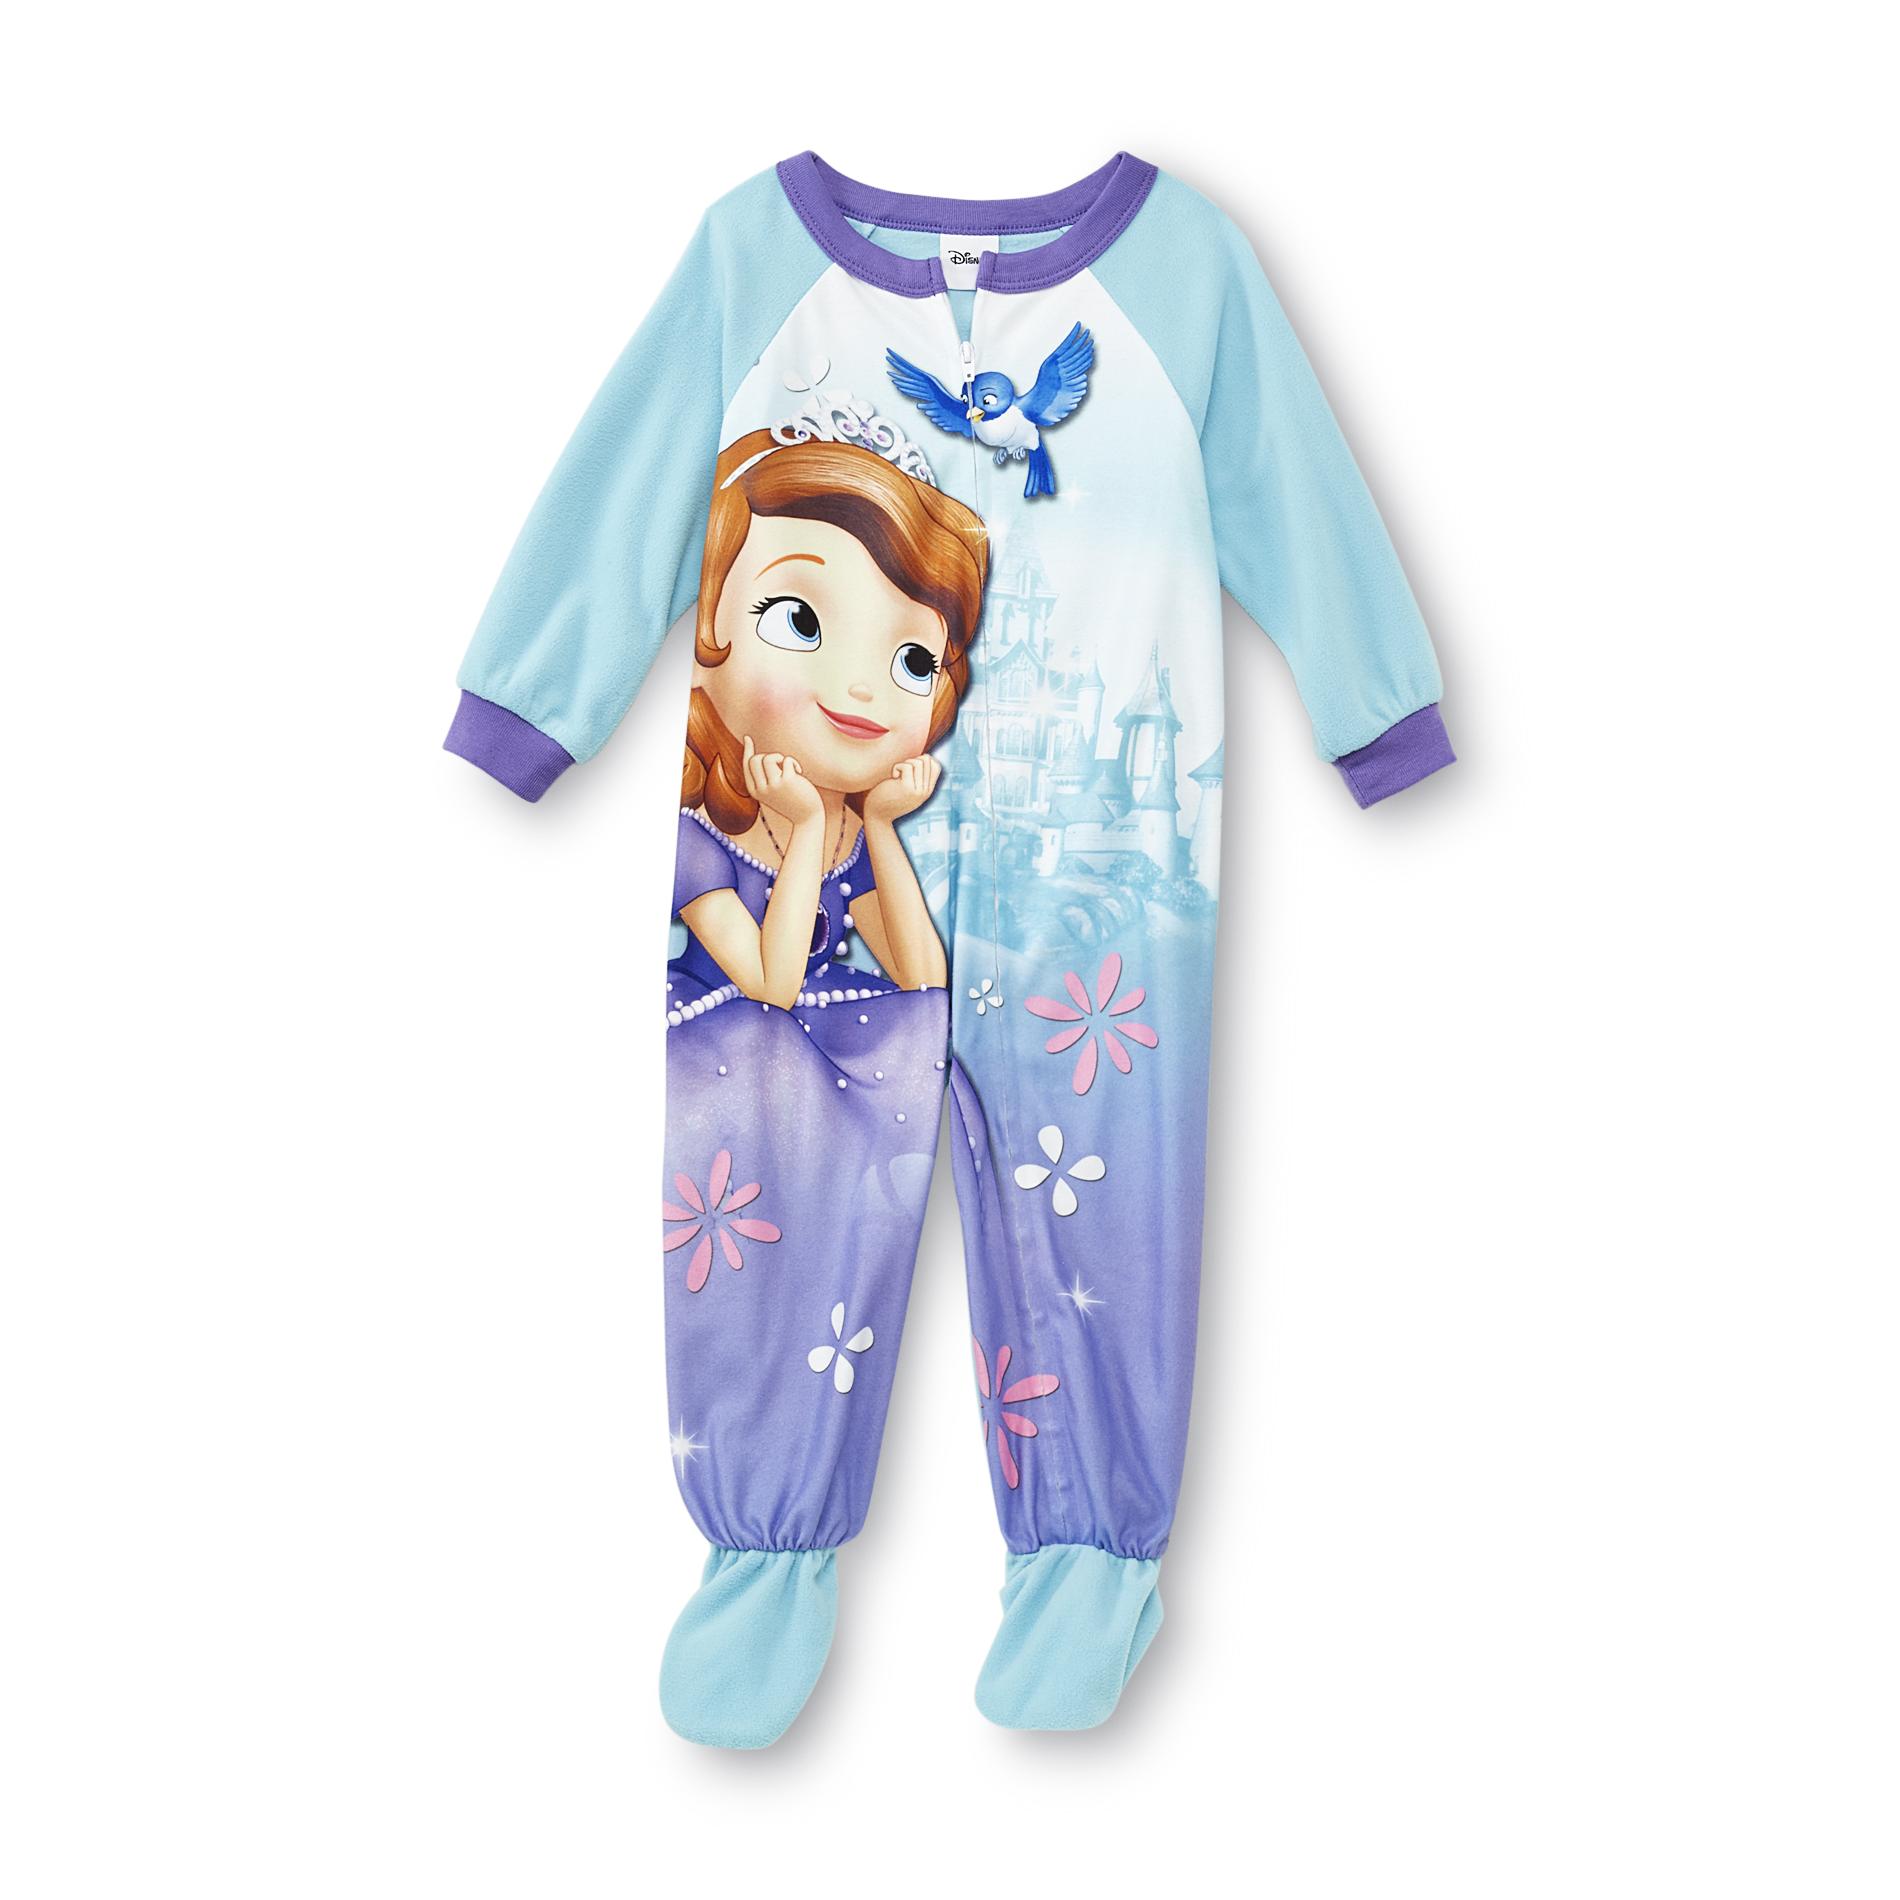 Disney Infant & Toddler Girl's Footed Pajamas - Sofia The First